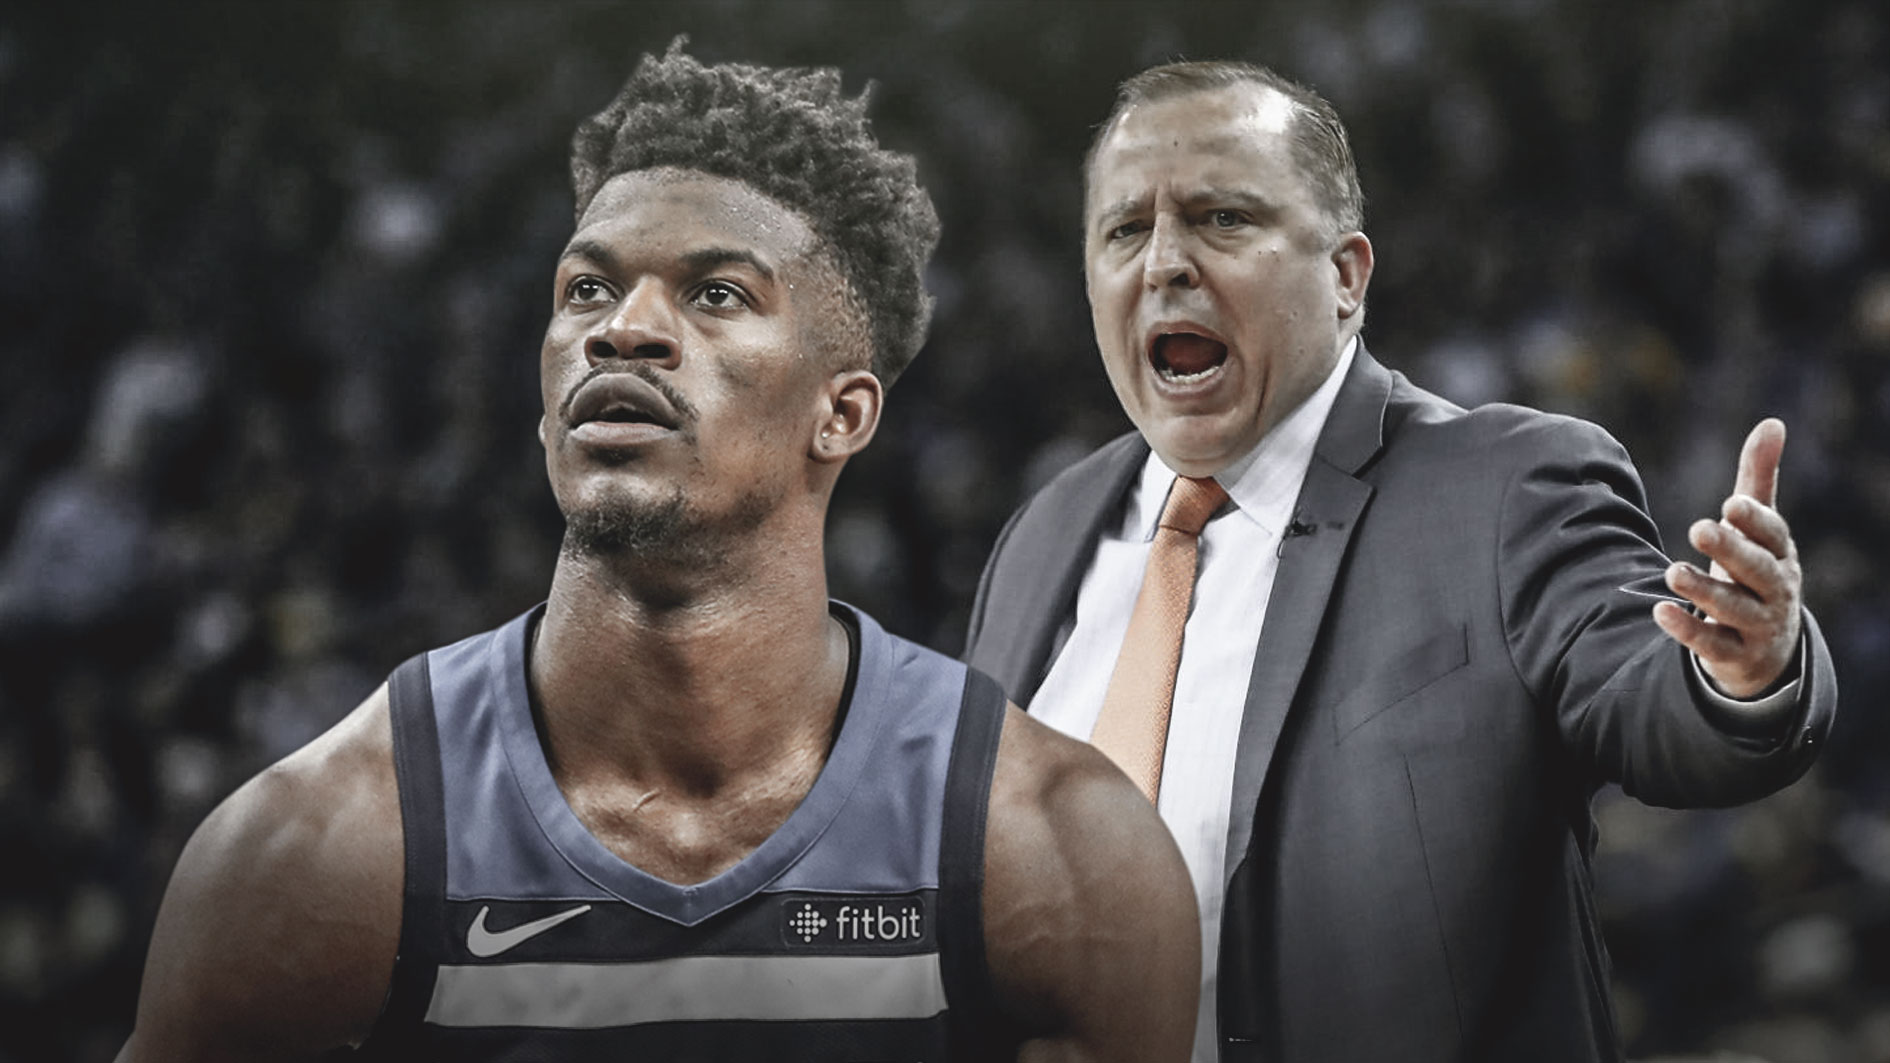 There-is-a-collective-belief-Tom-Thibodeau-still-not-ready-to-seriously-negotiate-trade-for-Jimmy-Butler